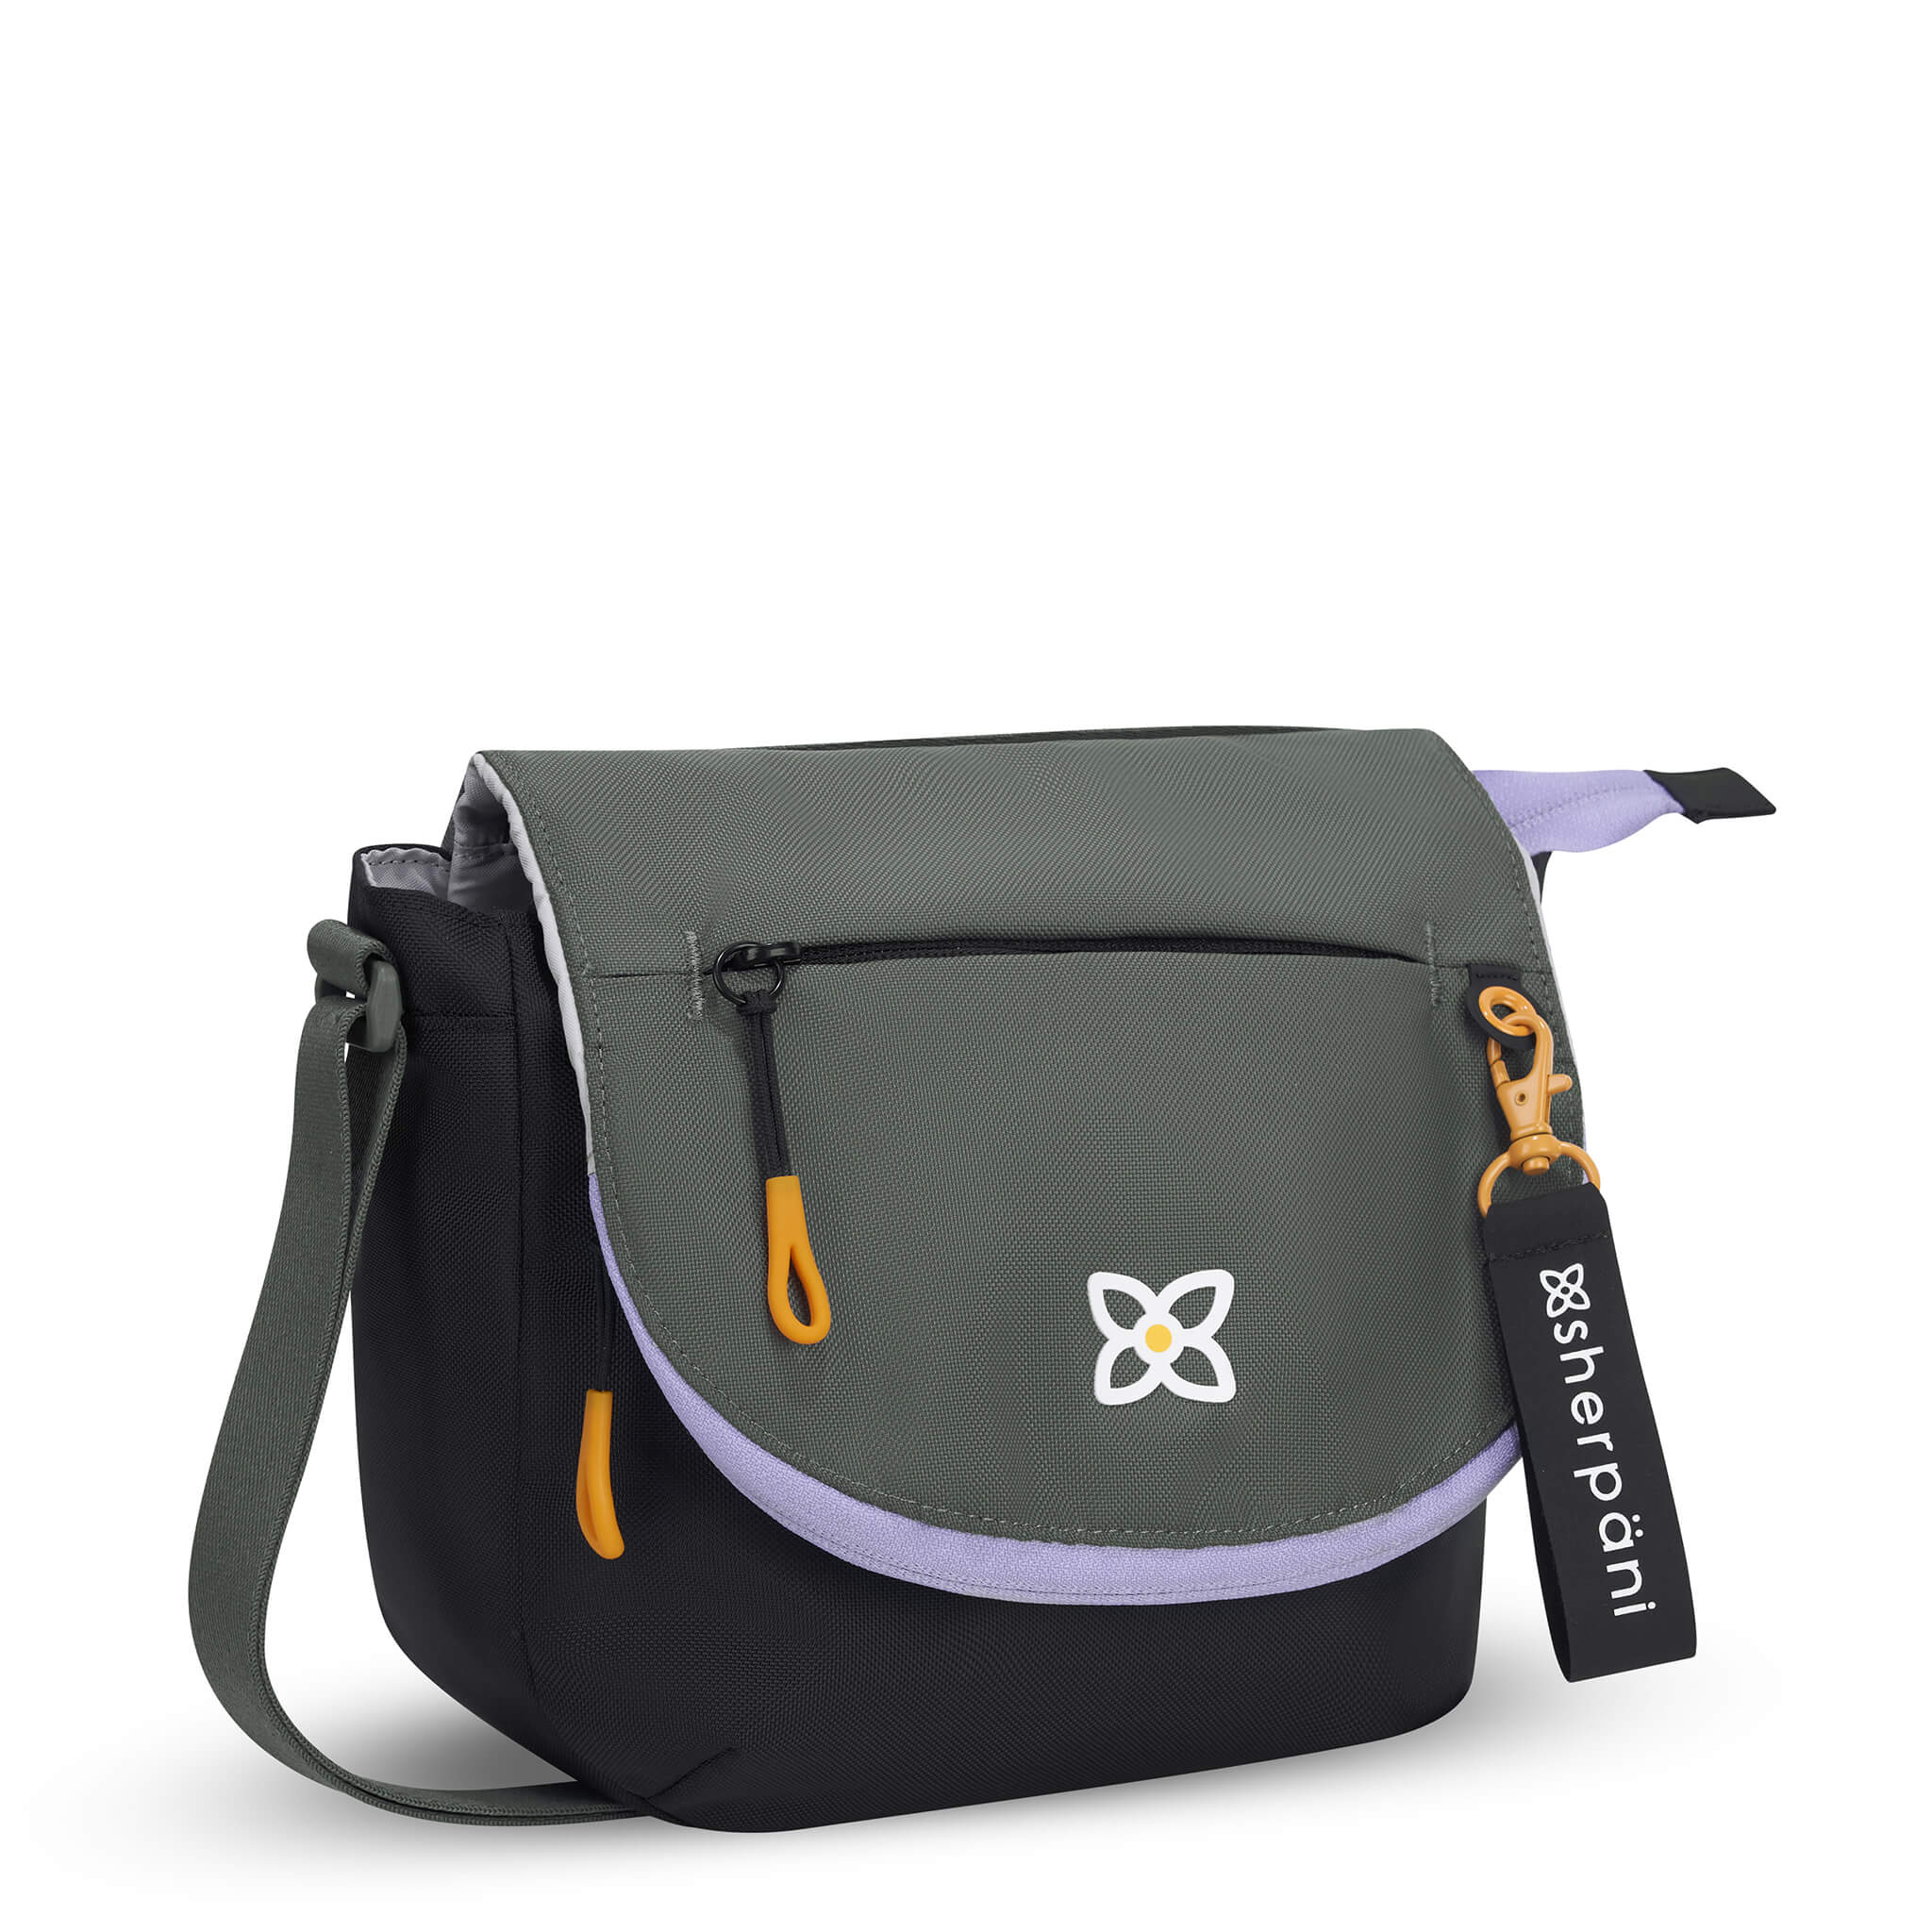 Angled front view of Sherpani messenger satchel bag, the Milli in Juniper. Milli features include an adjustable crossbody strap, front zipper pocket, brimmed zipper pocket, detachable keychain, magnetic closure, RFID security and multiple internal pockets for organization. The Juniper color is two-toned in black and gray with accents in yellow and purple. #color_juniper